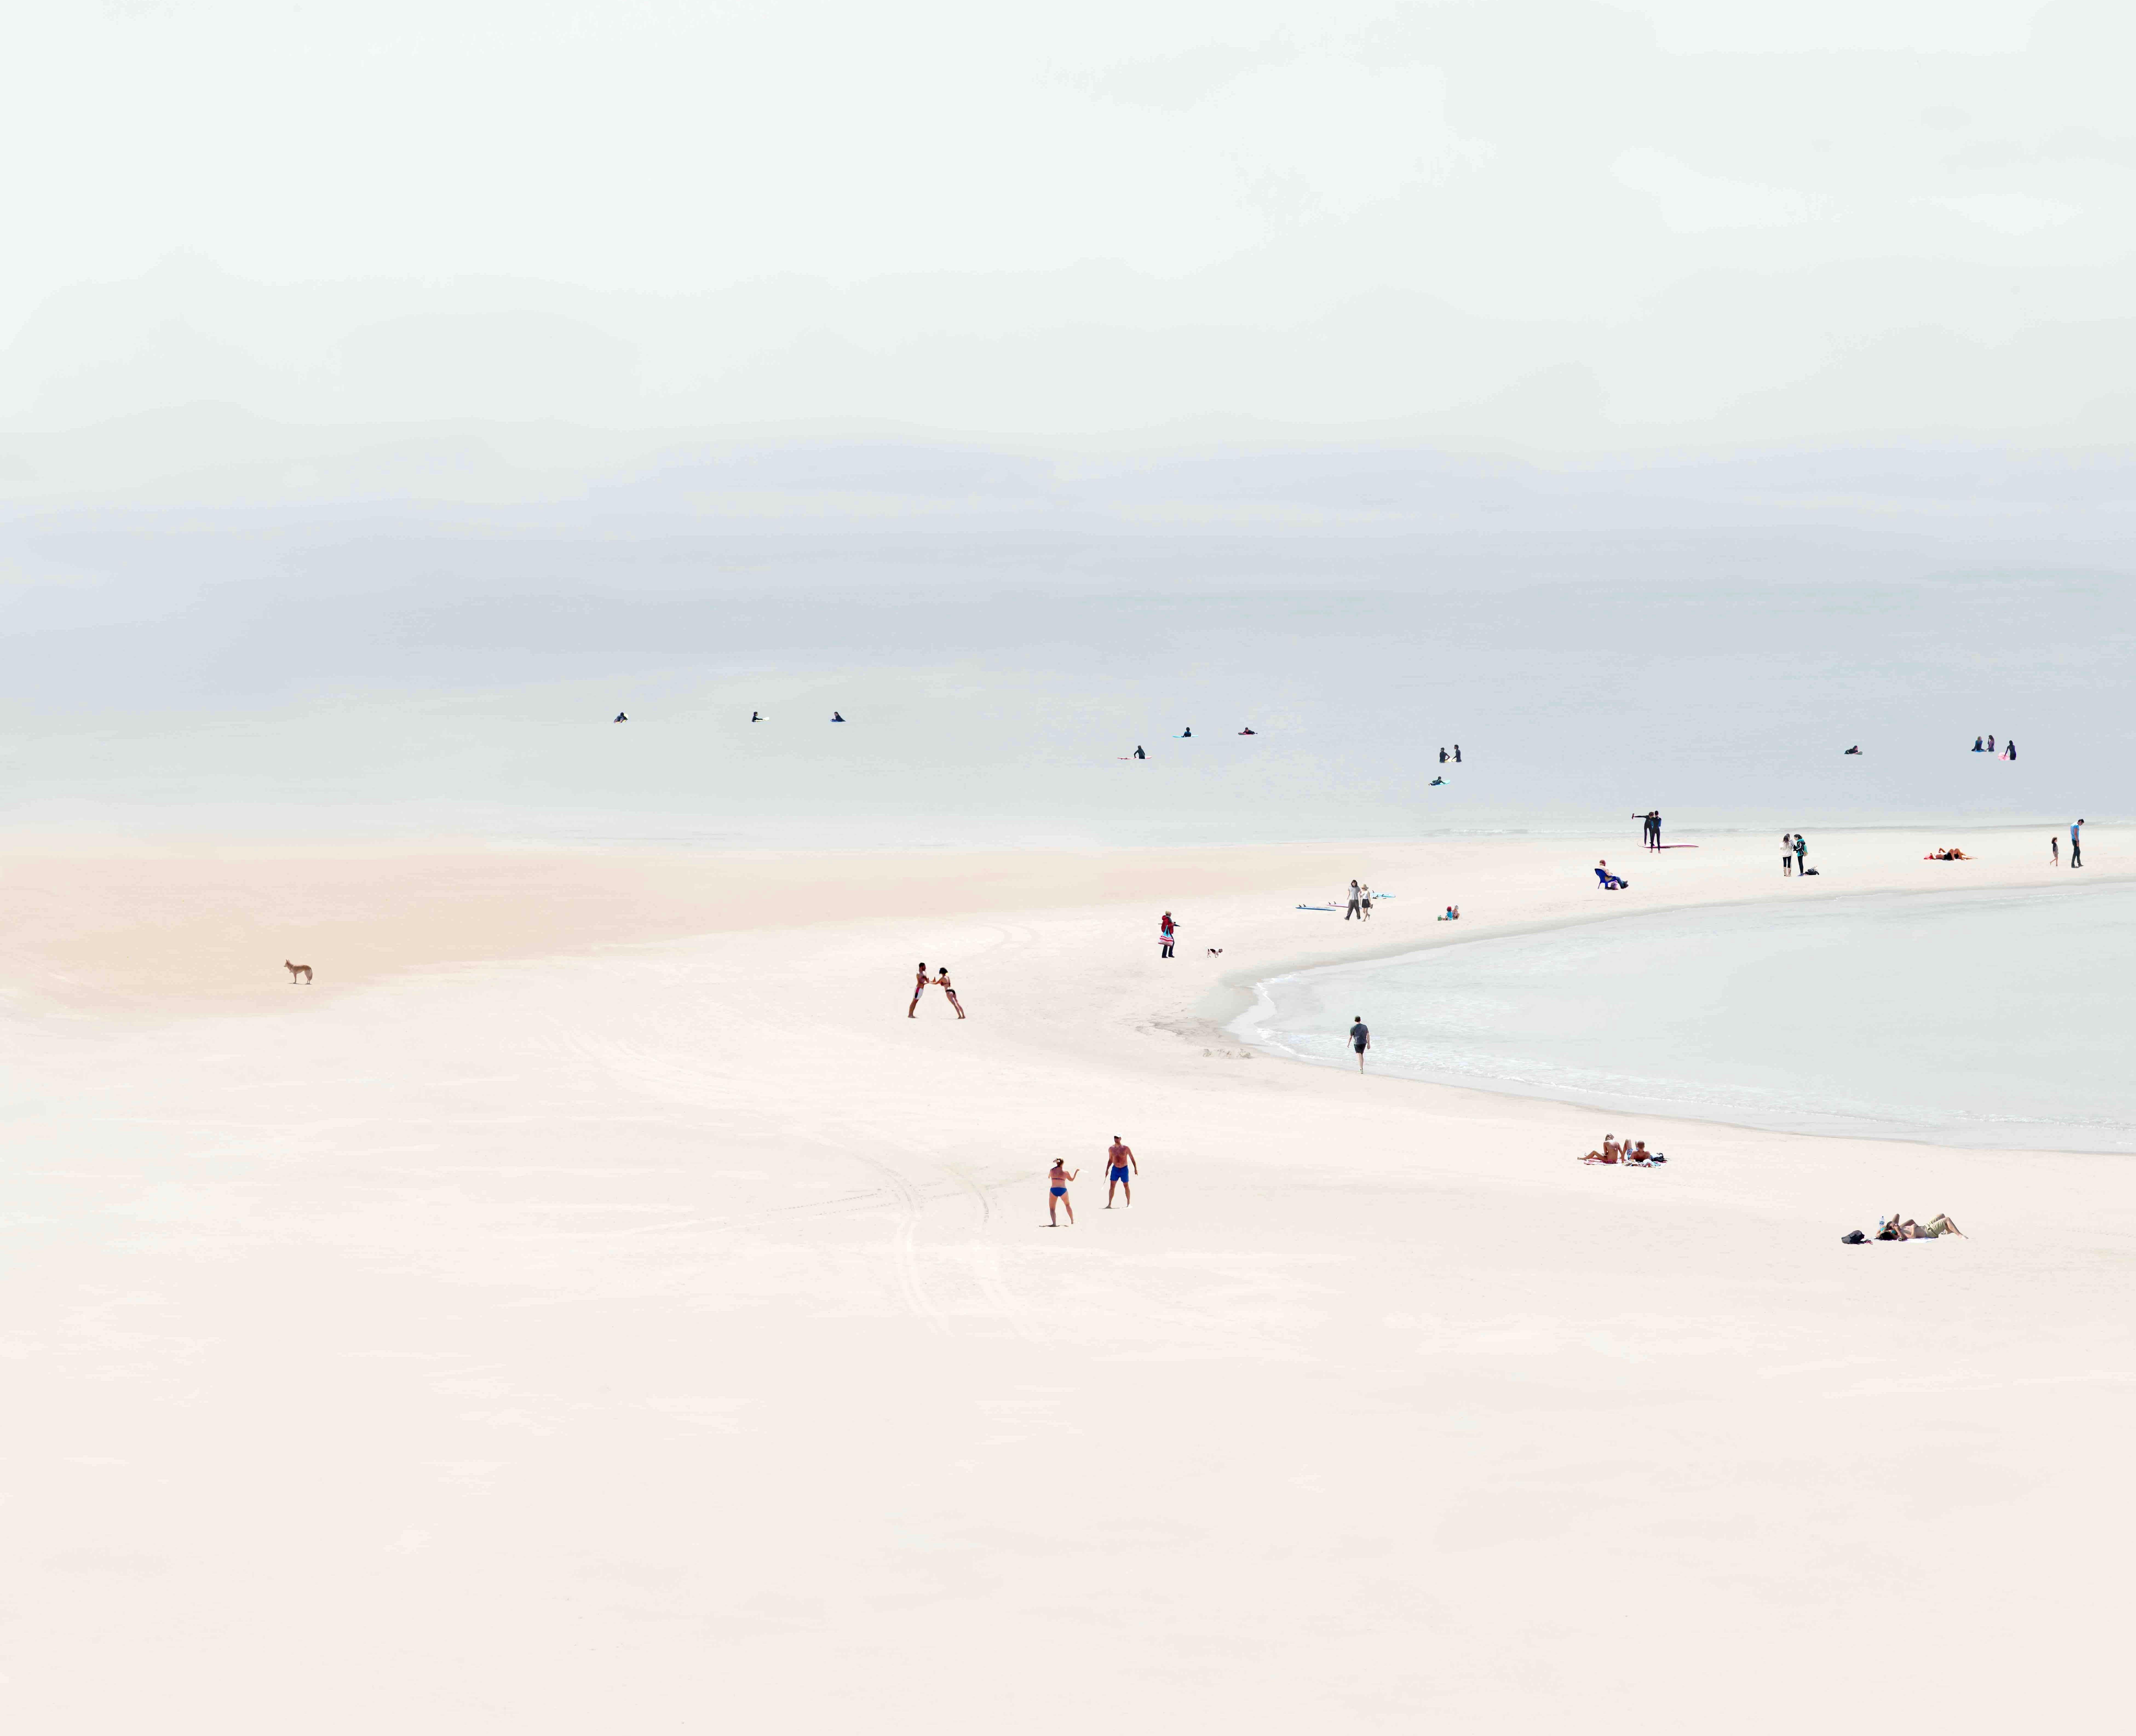 This art work is part of Igal`s beach series.
In this series, Igal takes photos of different scenes on the Tel Aviv beaches of Israel (where is lives) and manipulates the images to make it look as if they were surreal.
The all image has a whitish